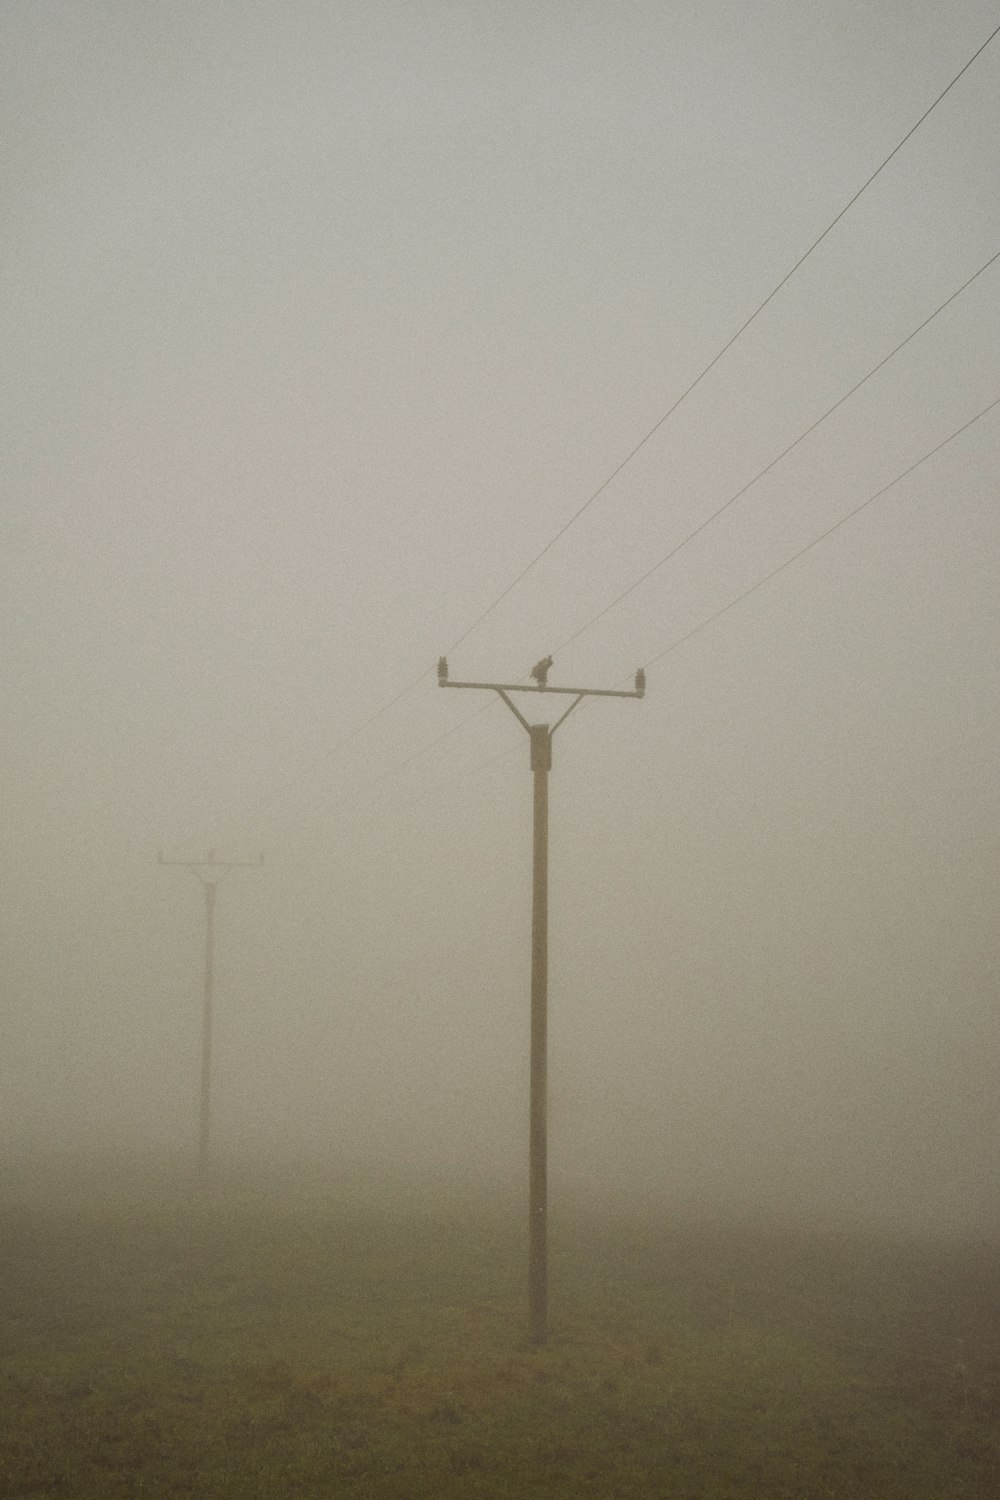 a foggy field with power lines and telephone poles